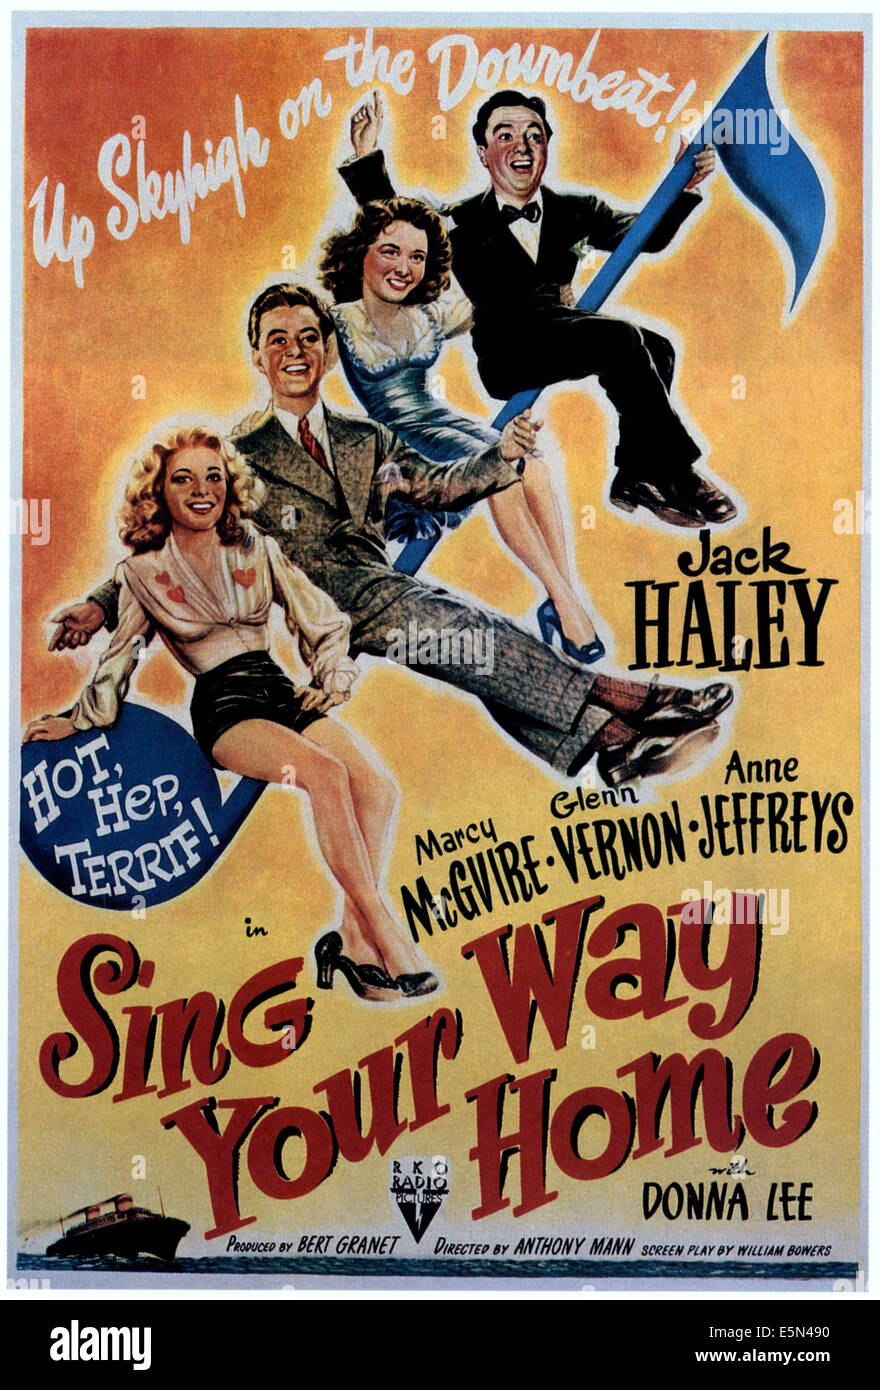 SING YOUR WAY HOME, from bottom left: Anne Jeffreys, Glen Vernon, Marcy McGuire, Jack Haley, 1945. Stock Photo